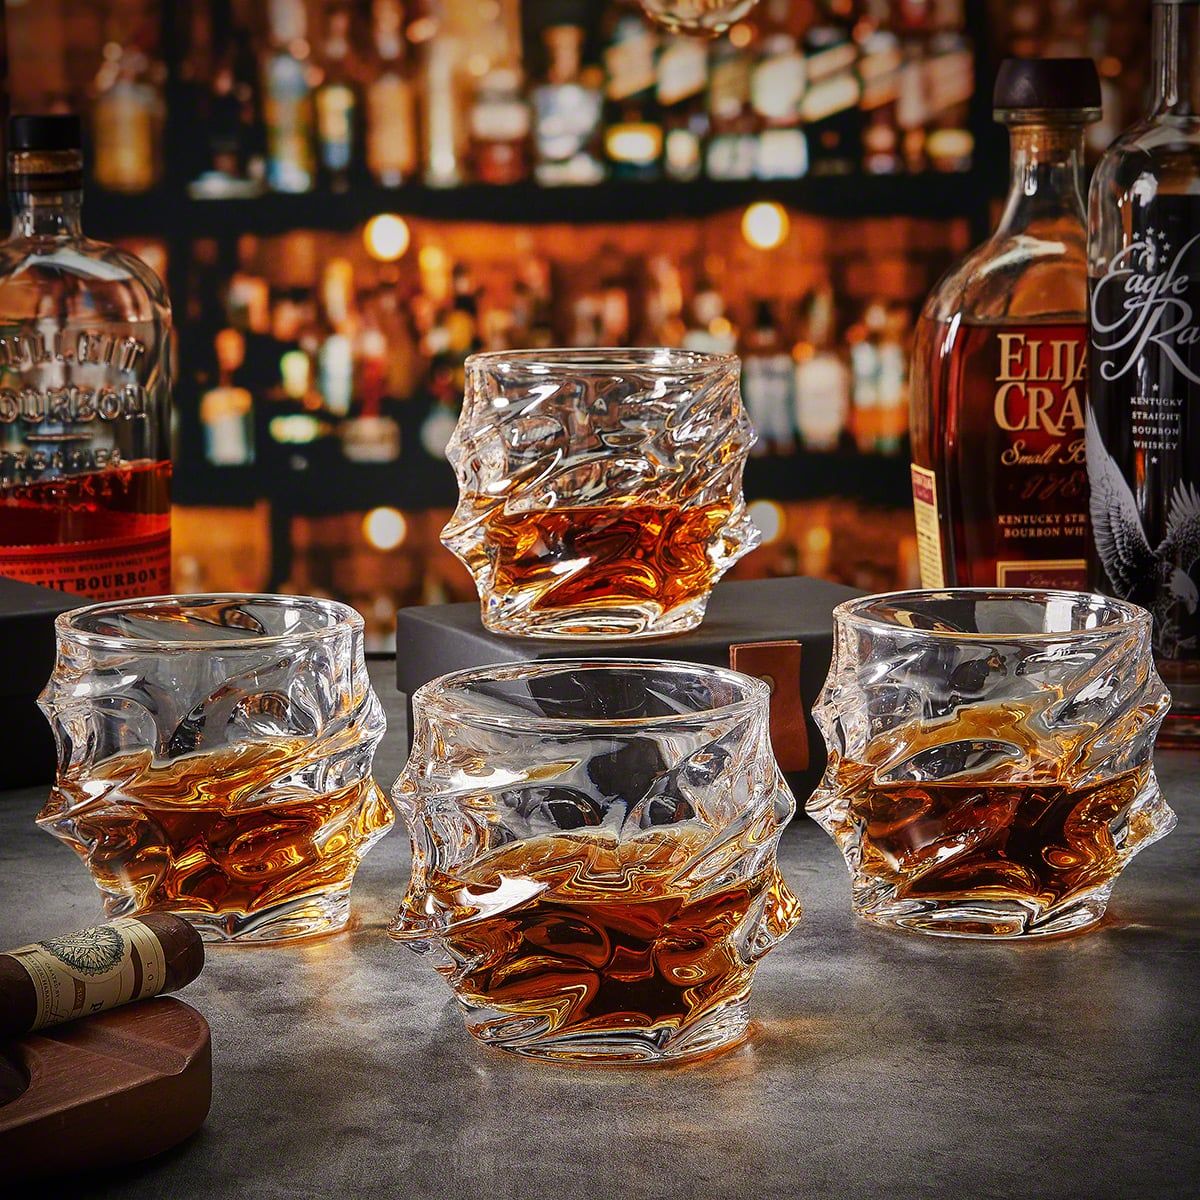 https://images.homewetbar.com/media/catalog/product/s/c/sculpted-whiskey-glasses-set-of-4-p-10324.jpg?store=default&image-type=image